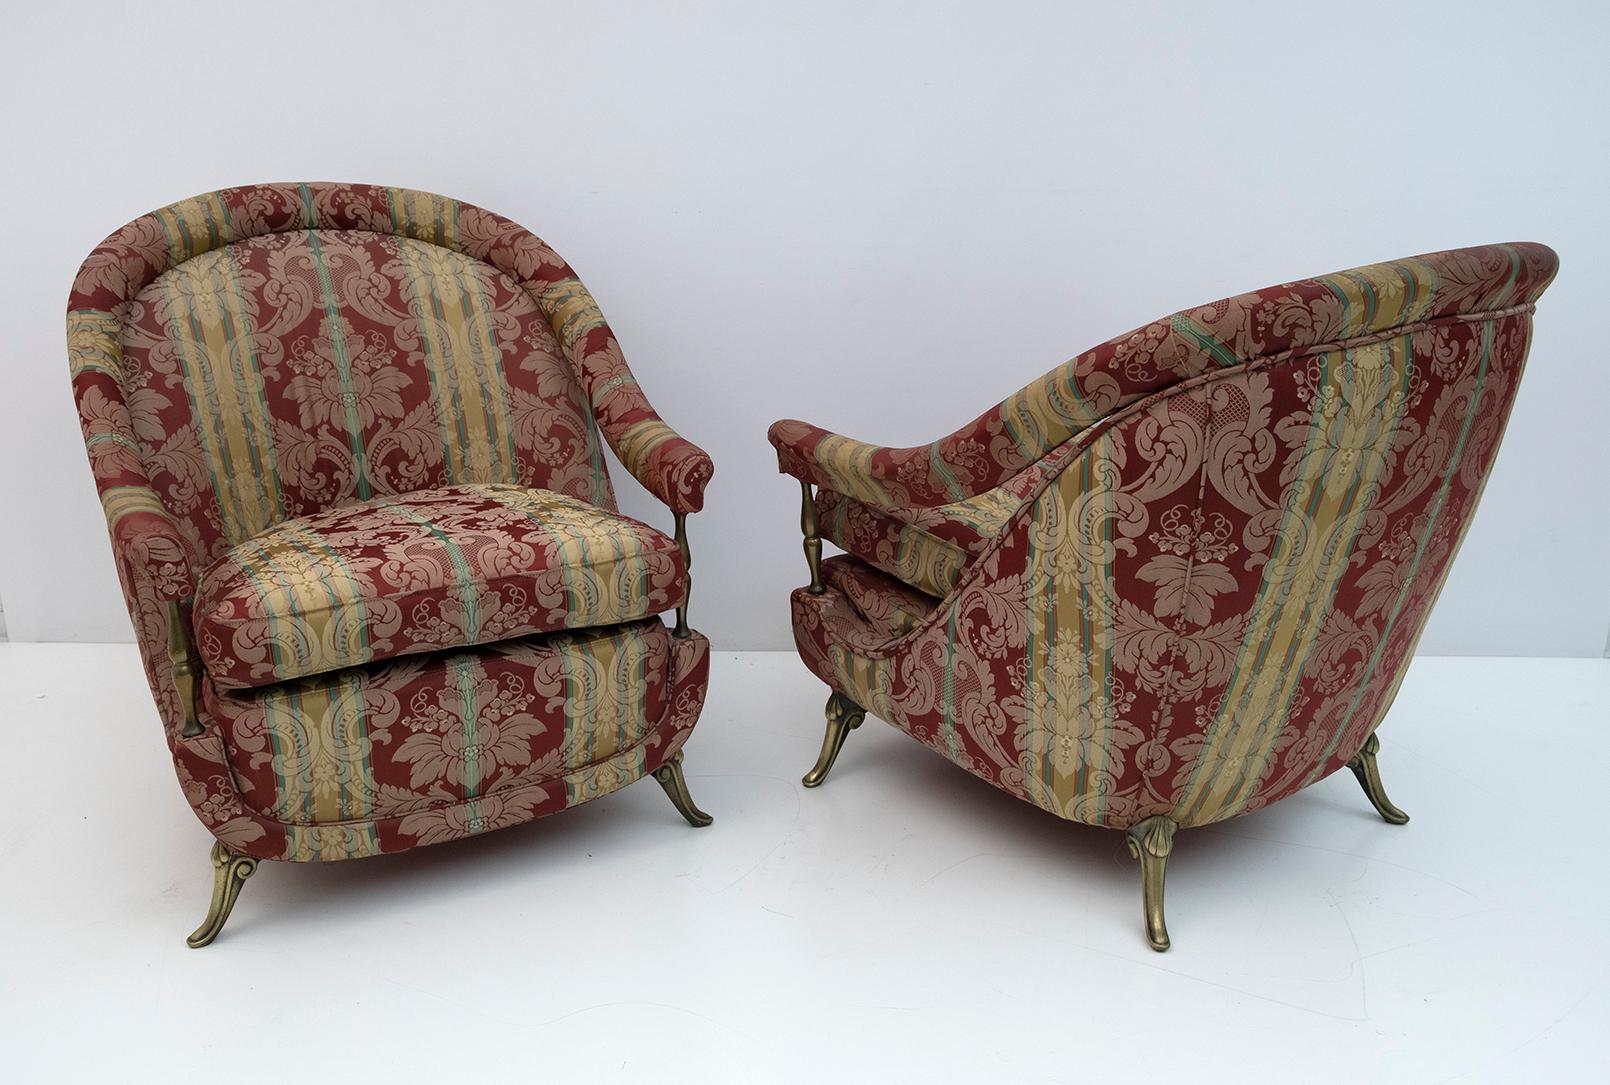 Pair of neoclassical style armchairs, with feet and columns to support the armrests, in brass. The upholstery was redone twenty years ago but is worn and stained, a new upholstery is recommended. Italian production of the 1950s.